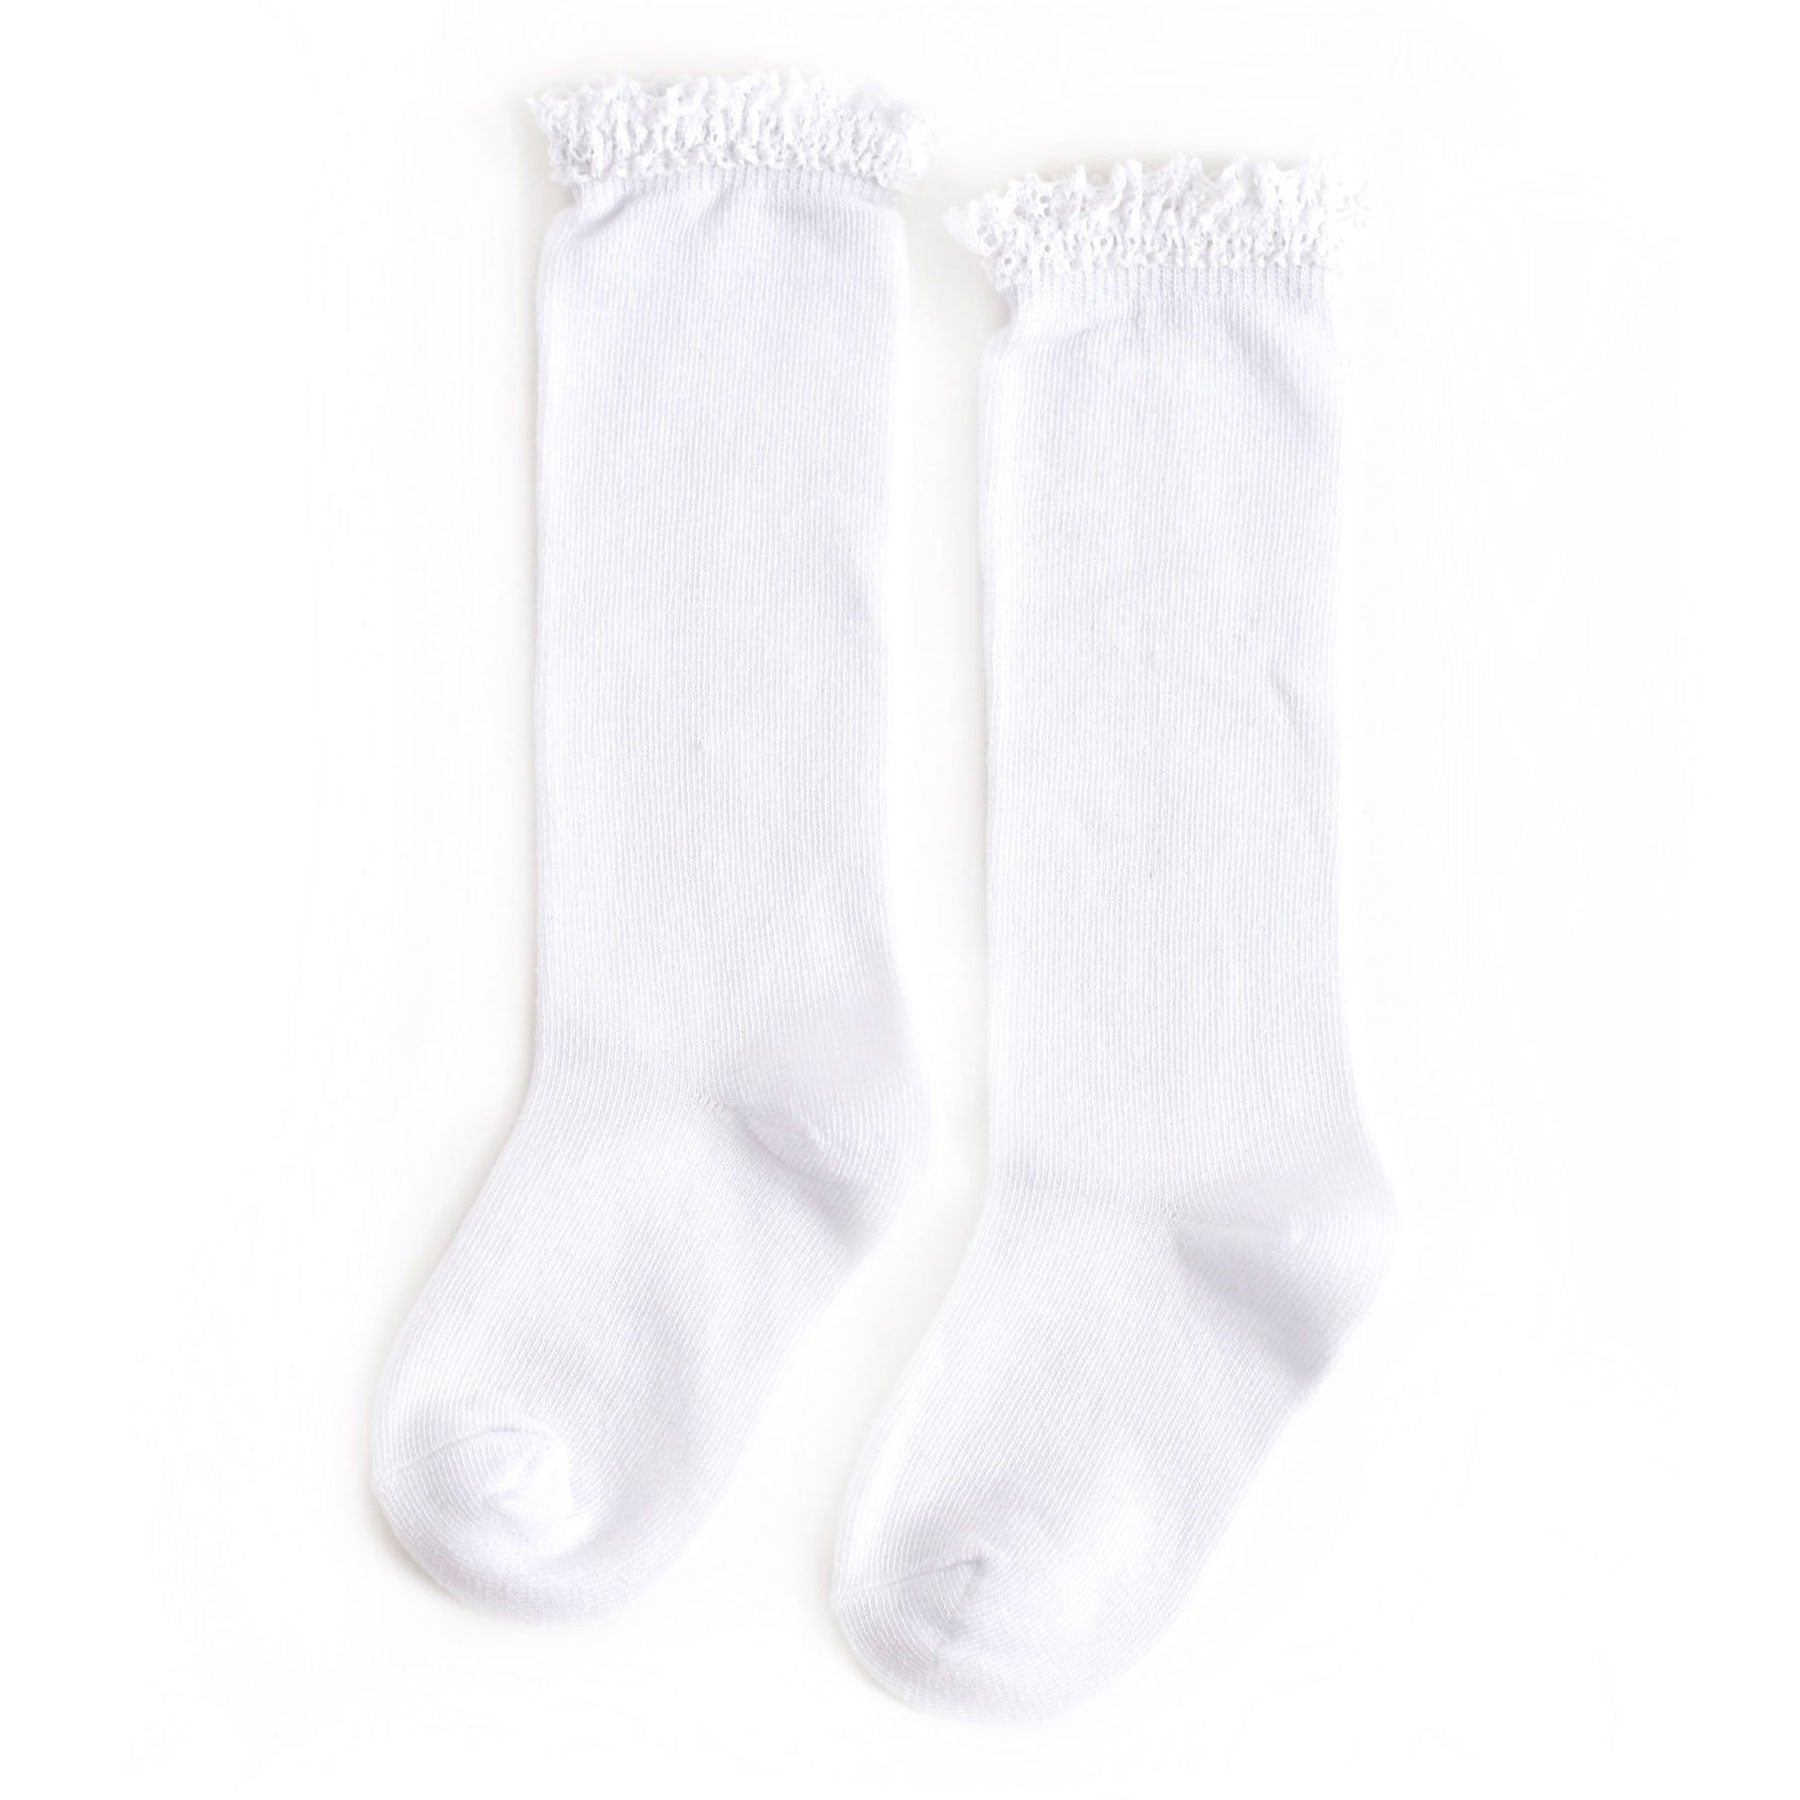 Little Stocking Co Knee High Socks - White Lace Top